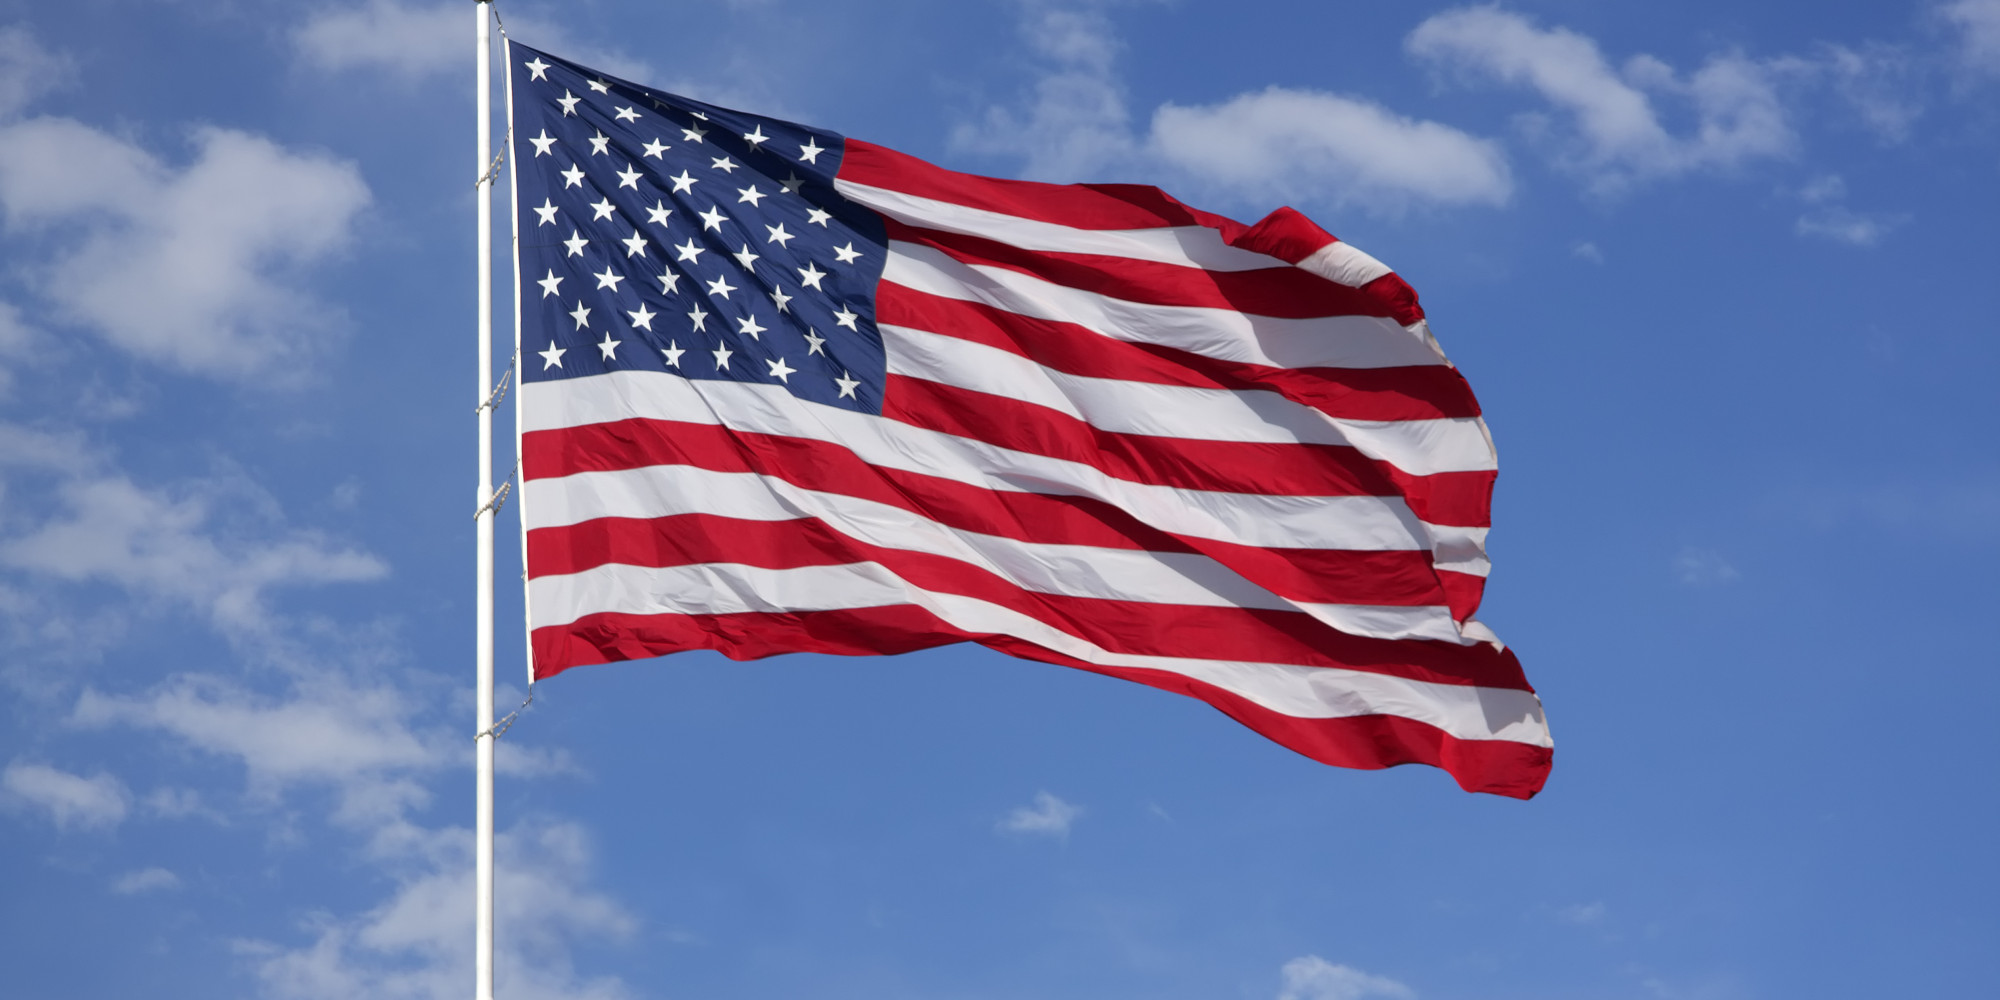 School Can Ban American Flag Shirts Over Safety Concerns, Federal 